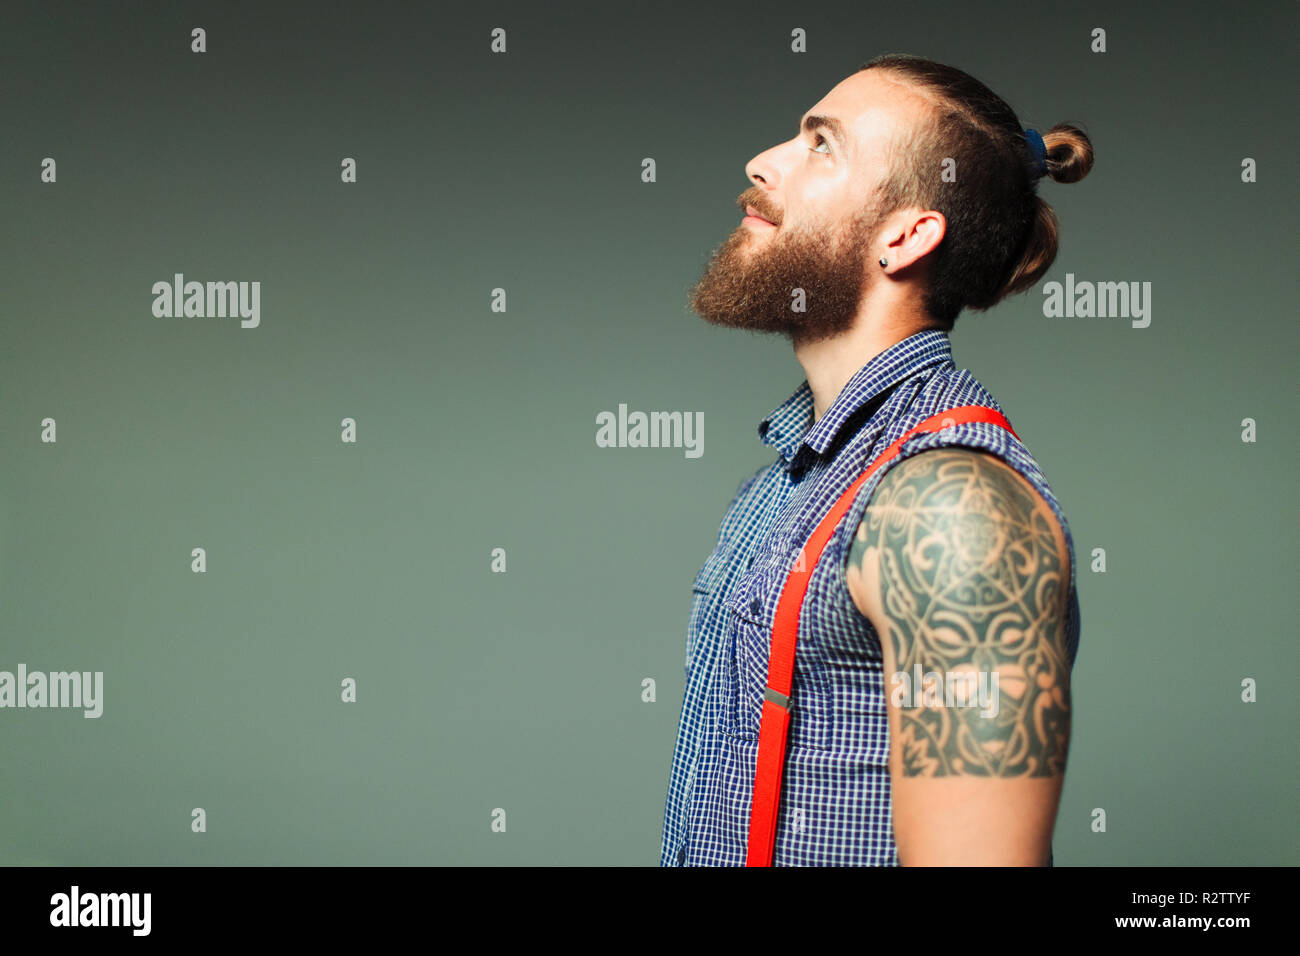 Curious hipster man with beard and shoulder tattoo looking up Stock Photo